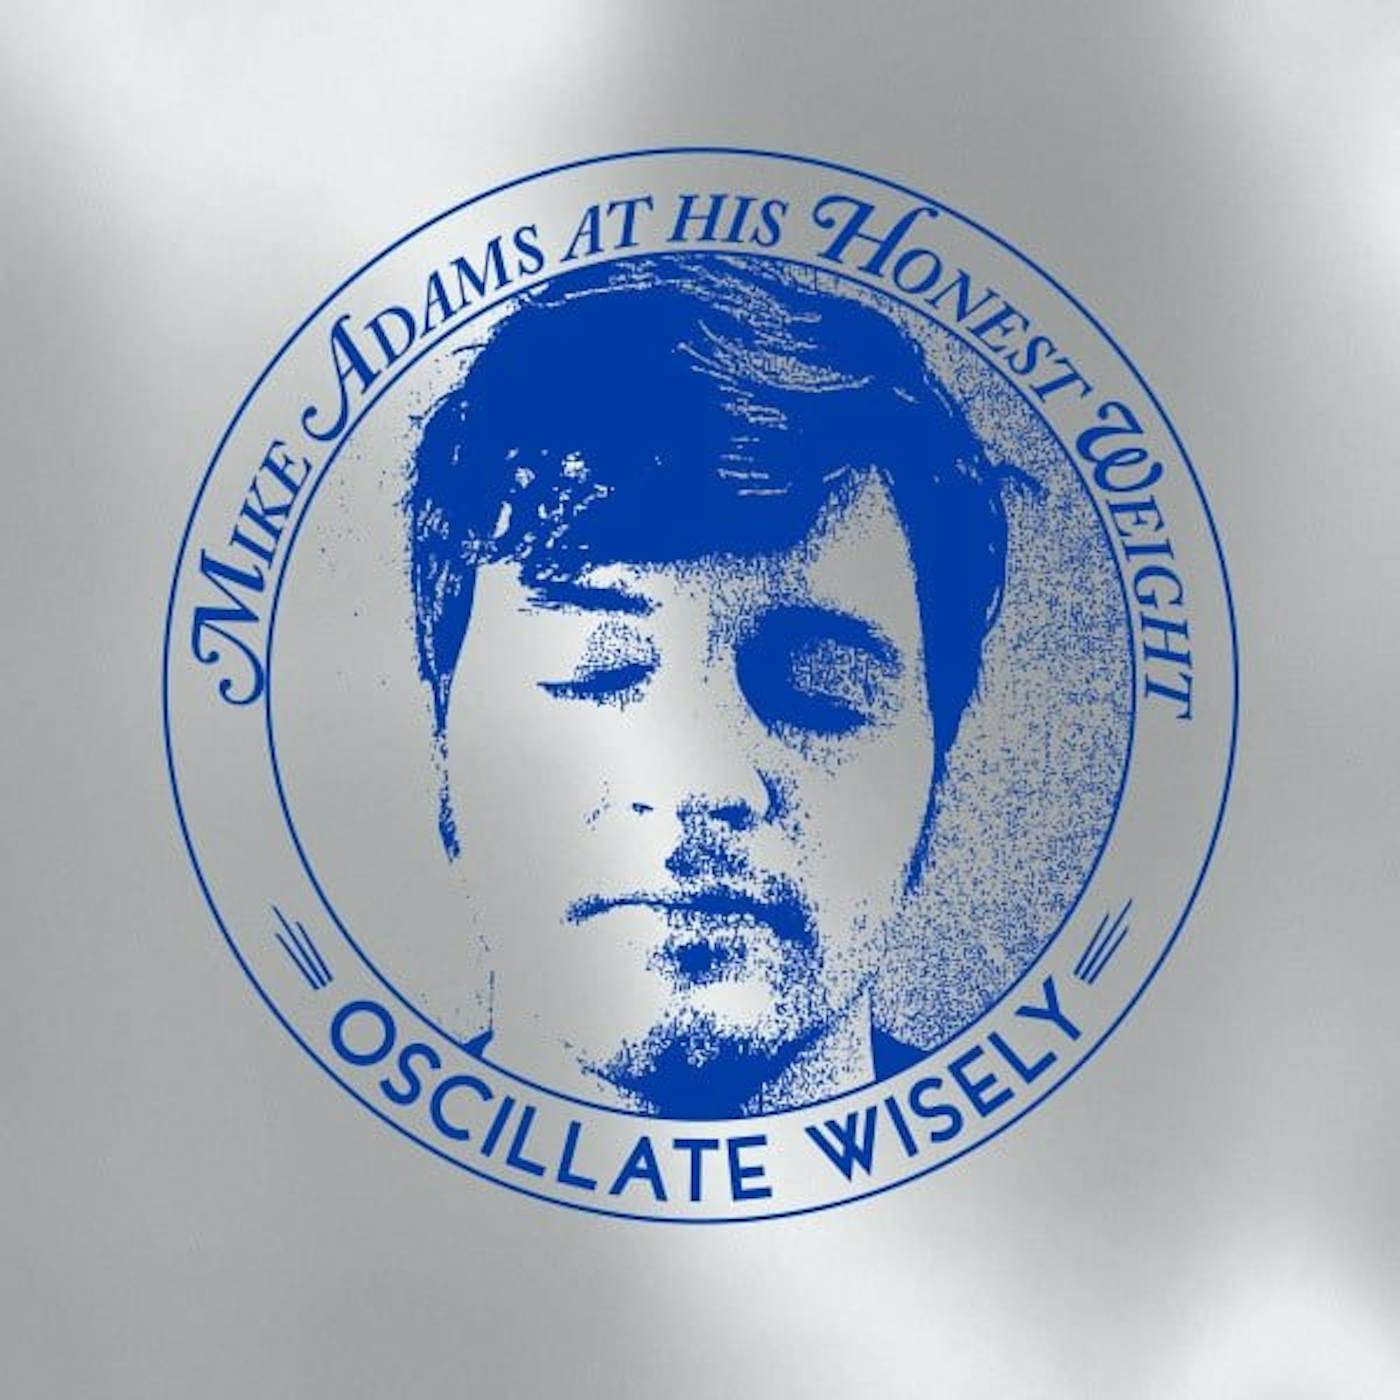 Mike Adams at His Honest Weight OSCILLATE WISELY: 10TH ANNIVERSARY Vinyl Record